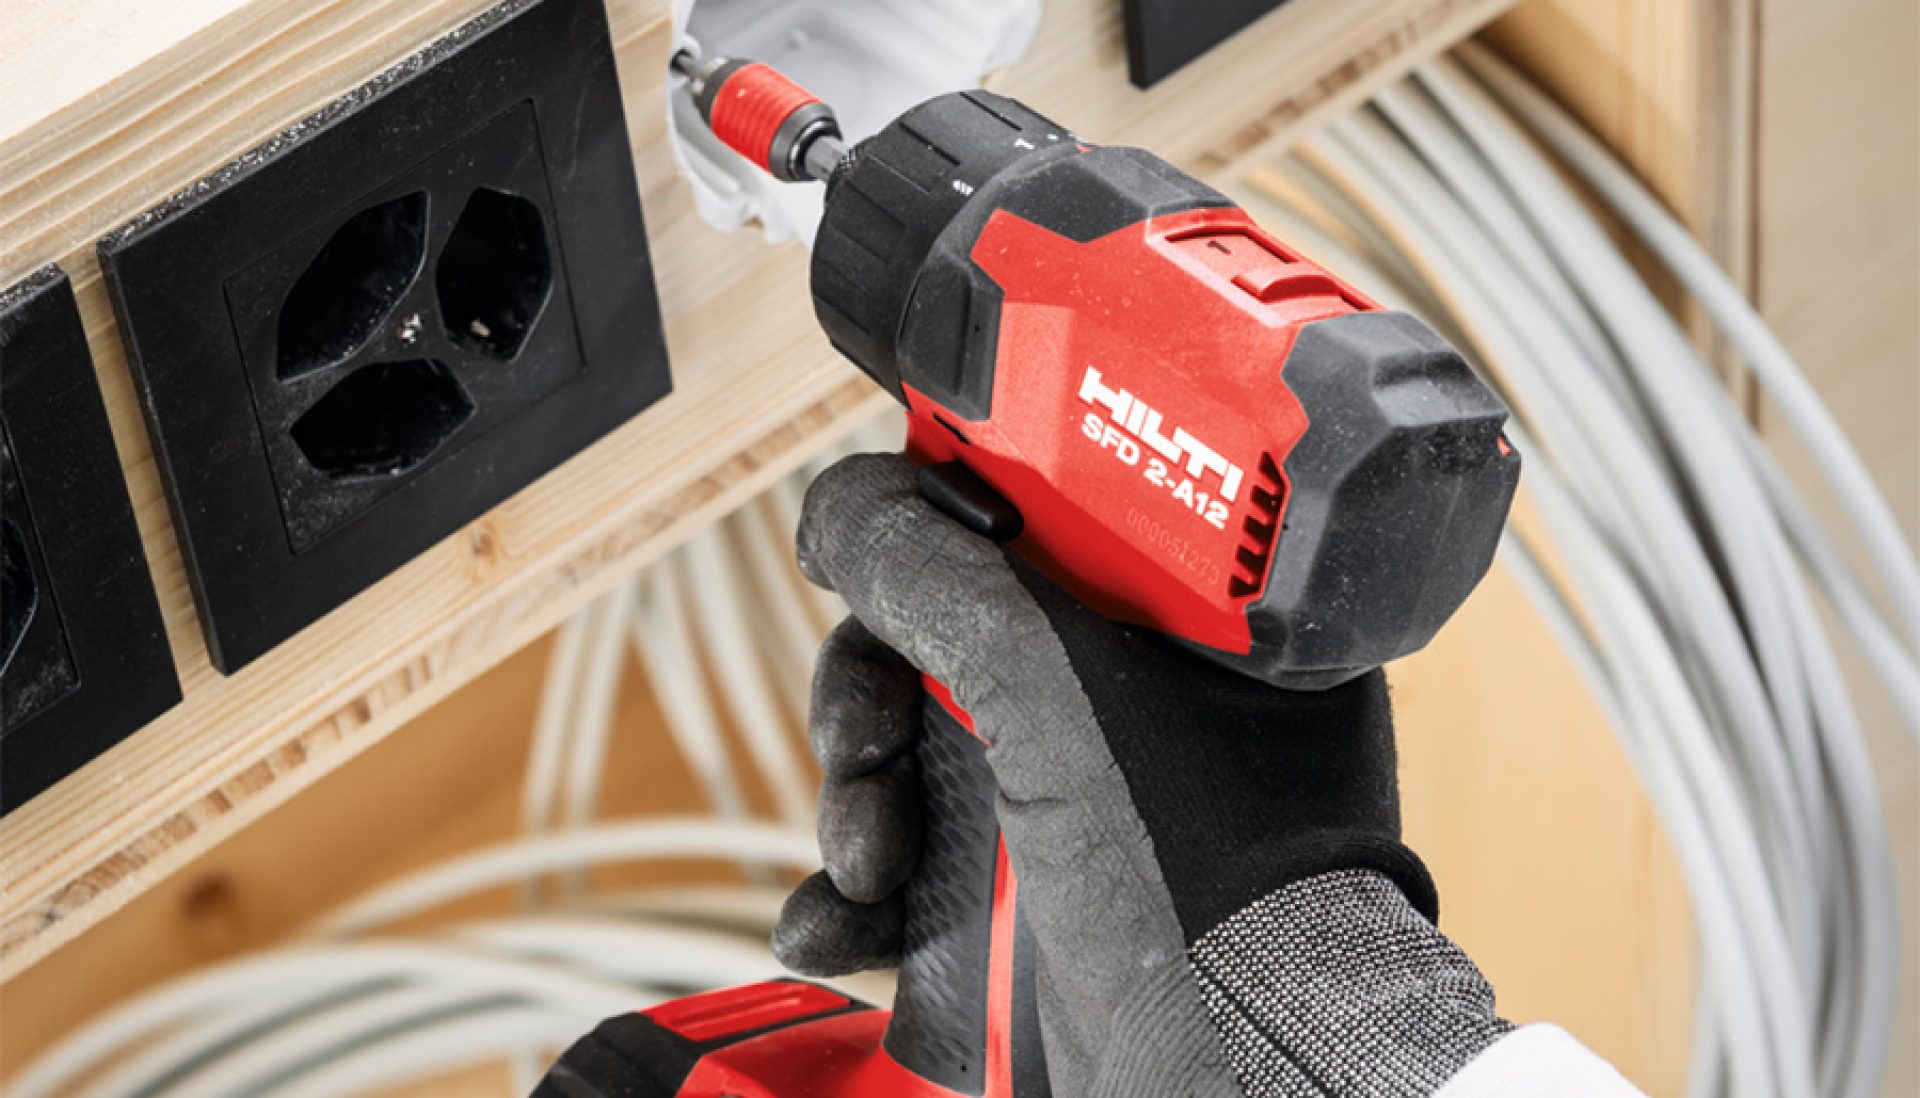 The Hilti range of 12V cordless drills, screw drivers, and impact drivers.